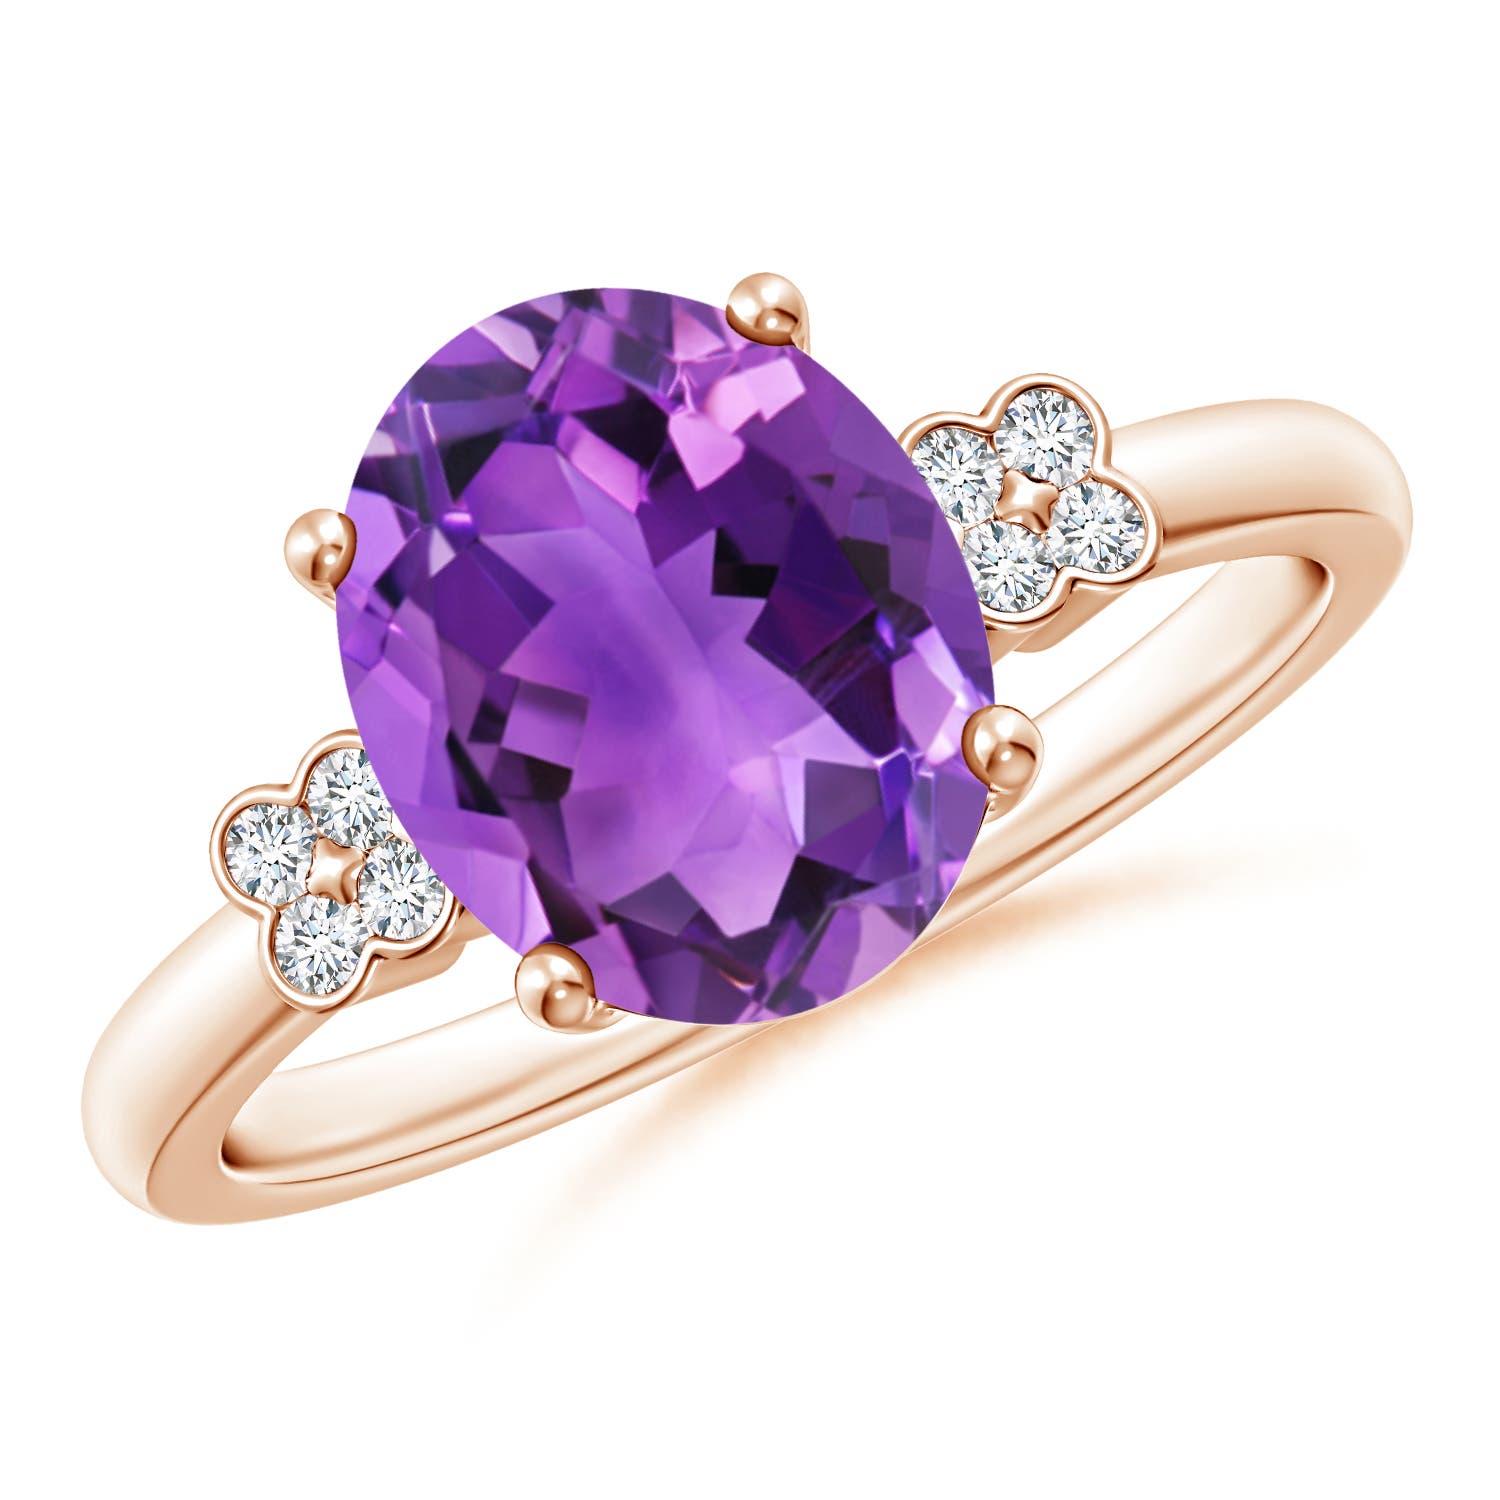 AAA- Amethyst / 2.36 CT / 14 KT Rose Gold